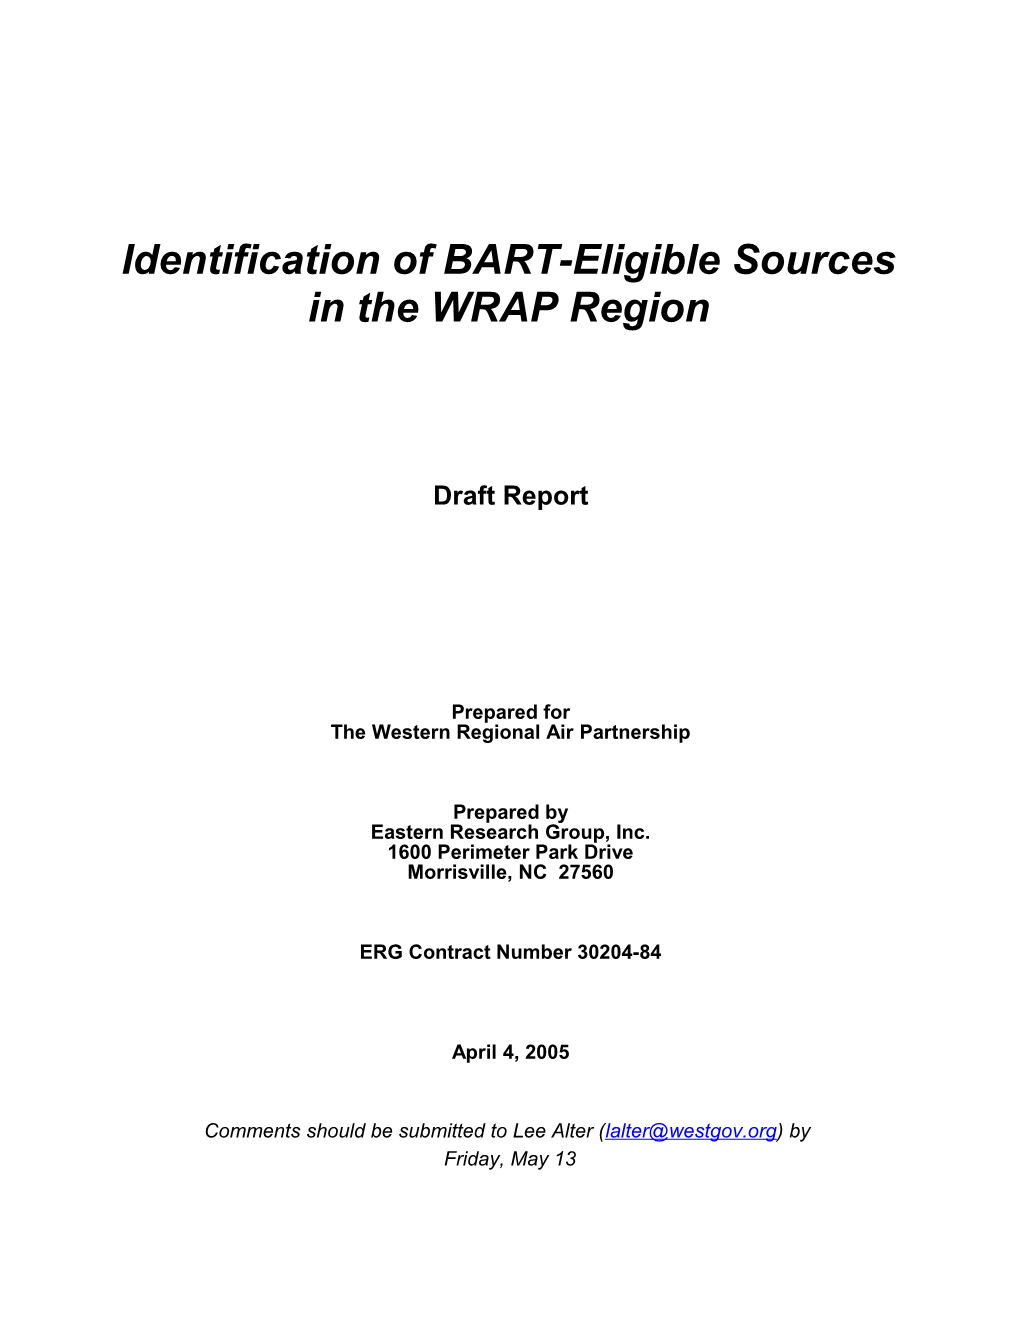 Overview of Procedure for Identifying Potentially BART-Eligible Sources